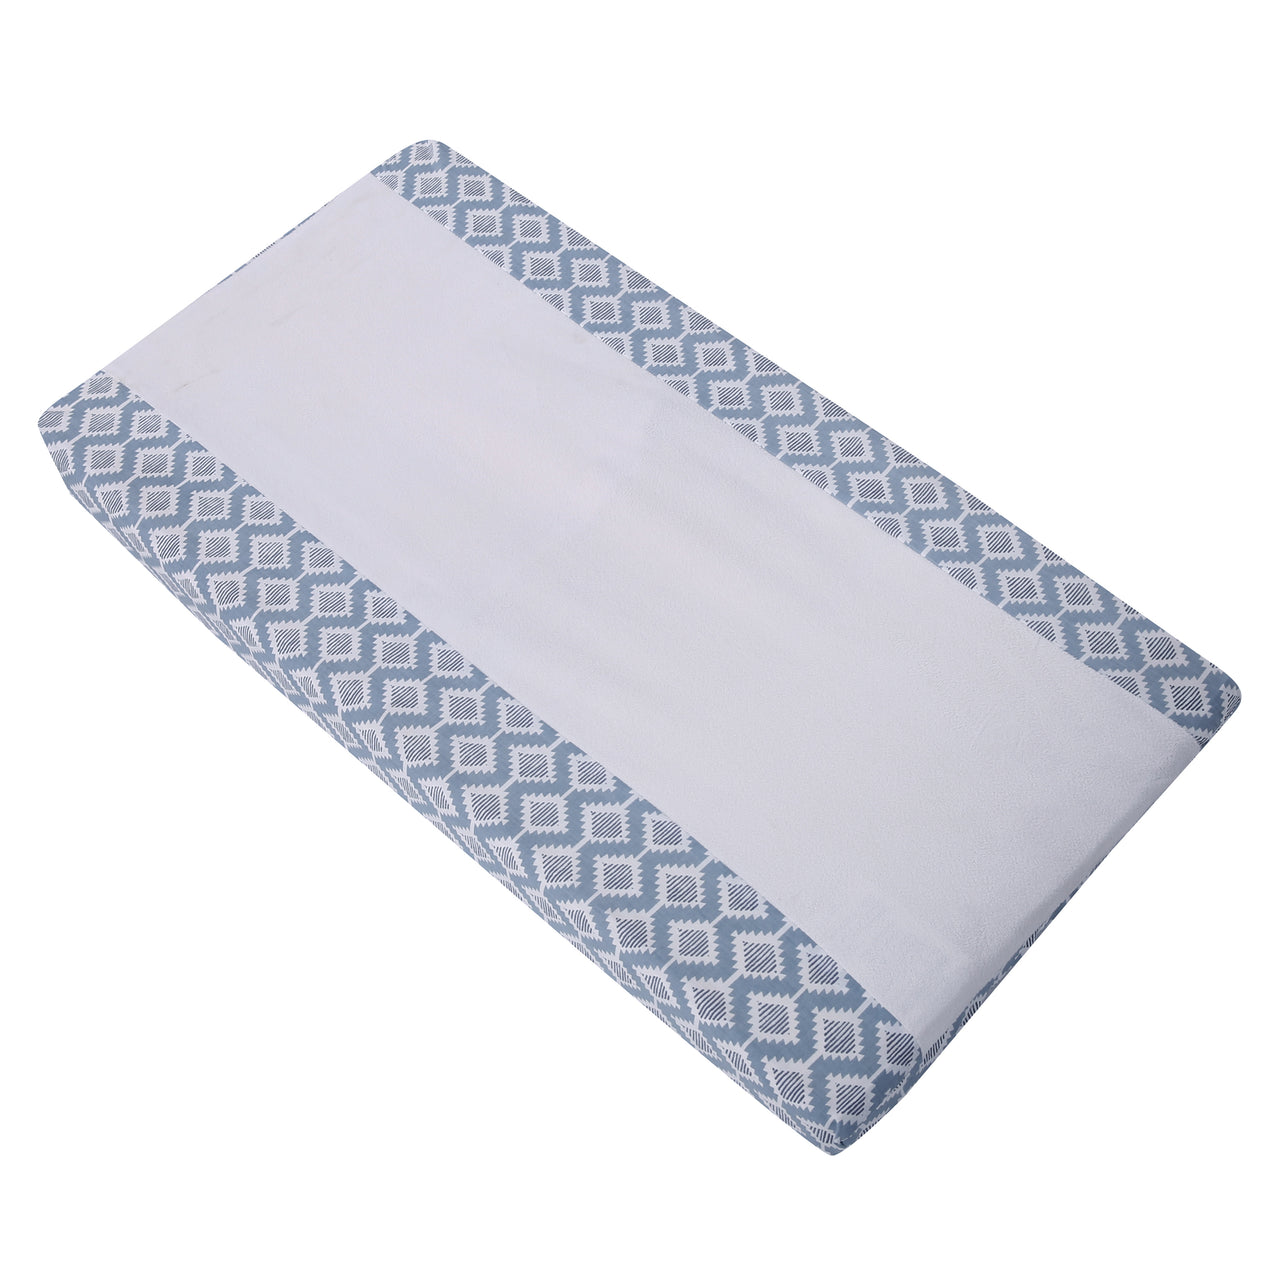 Emerson Changing Pad Cover